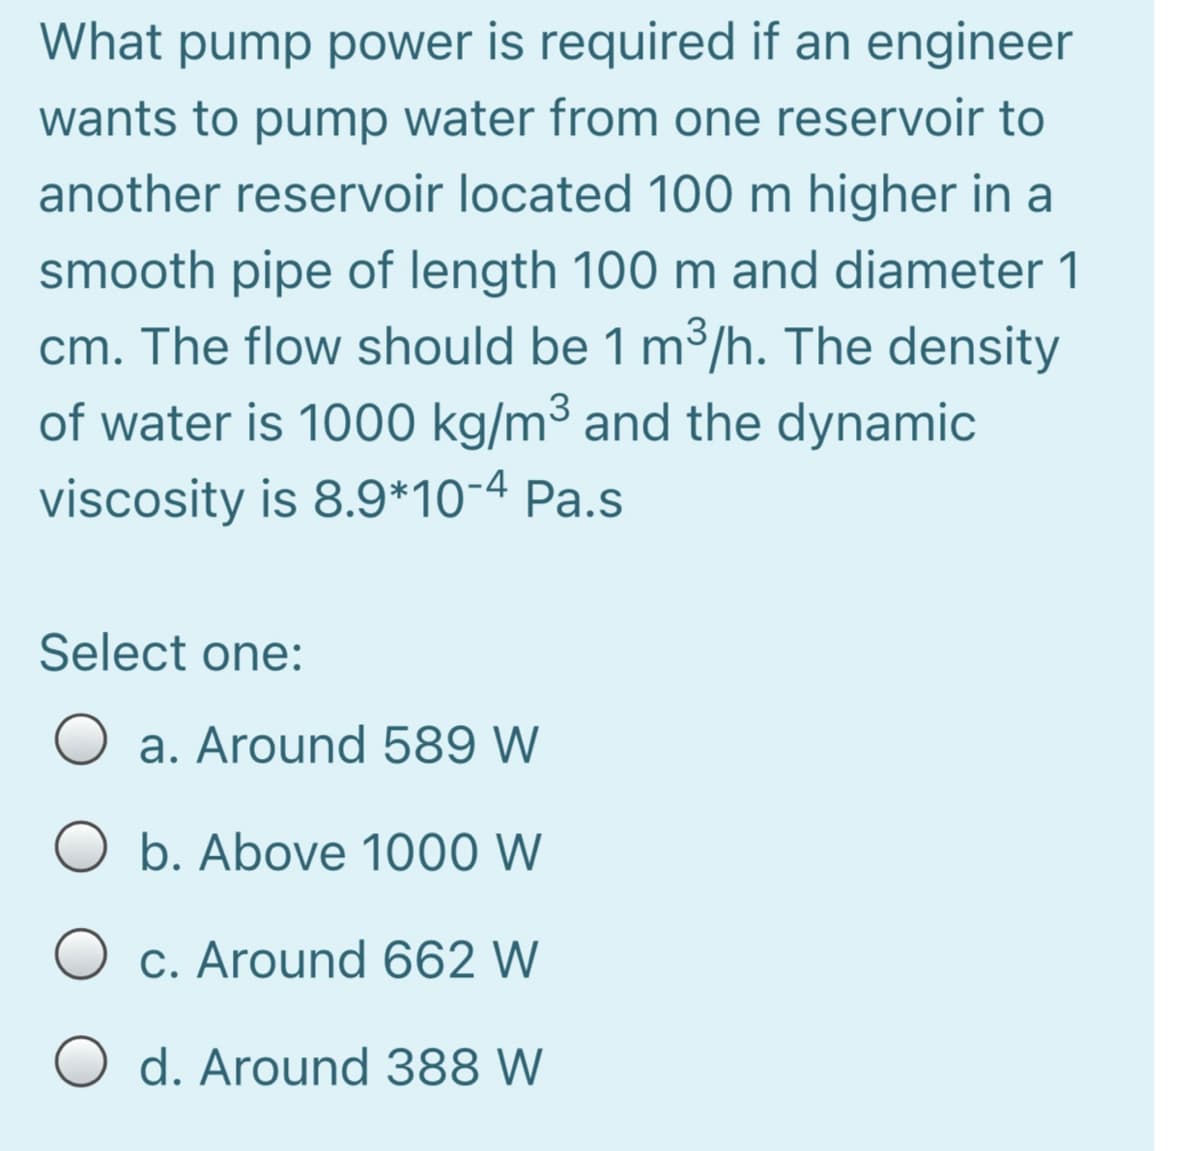 What pump power is required if an engineer
wants to pump water from one reservoir to
another reservoir located 100 m higher in a
smooth pipe of length 100 m and diameter 1
cm. The flow should be 1 m3/h. The density
of water is 1000 kg/m³ and the dynamic
viscosity is 8.9*10-4 Pa.s
Select one:
a. Around 589 W
O b. Above 1000 W
O c. Around 662 W
O d. Around 388 W
